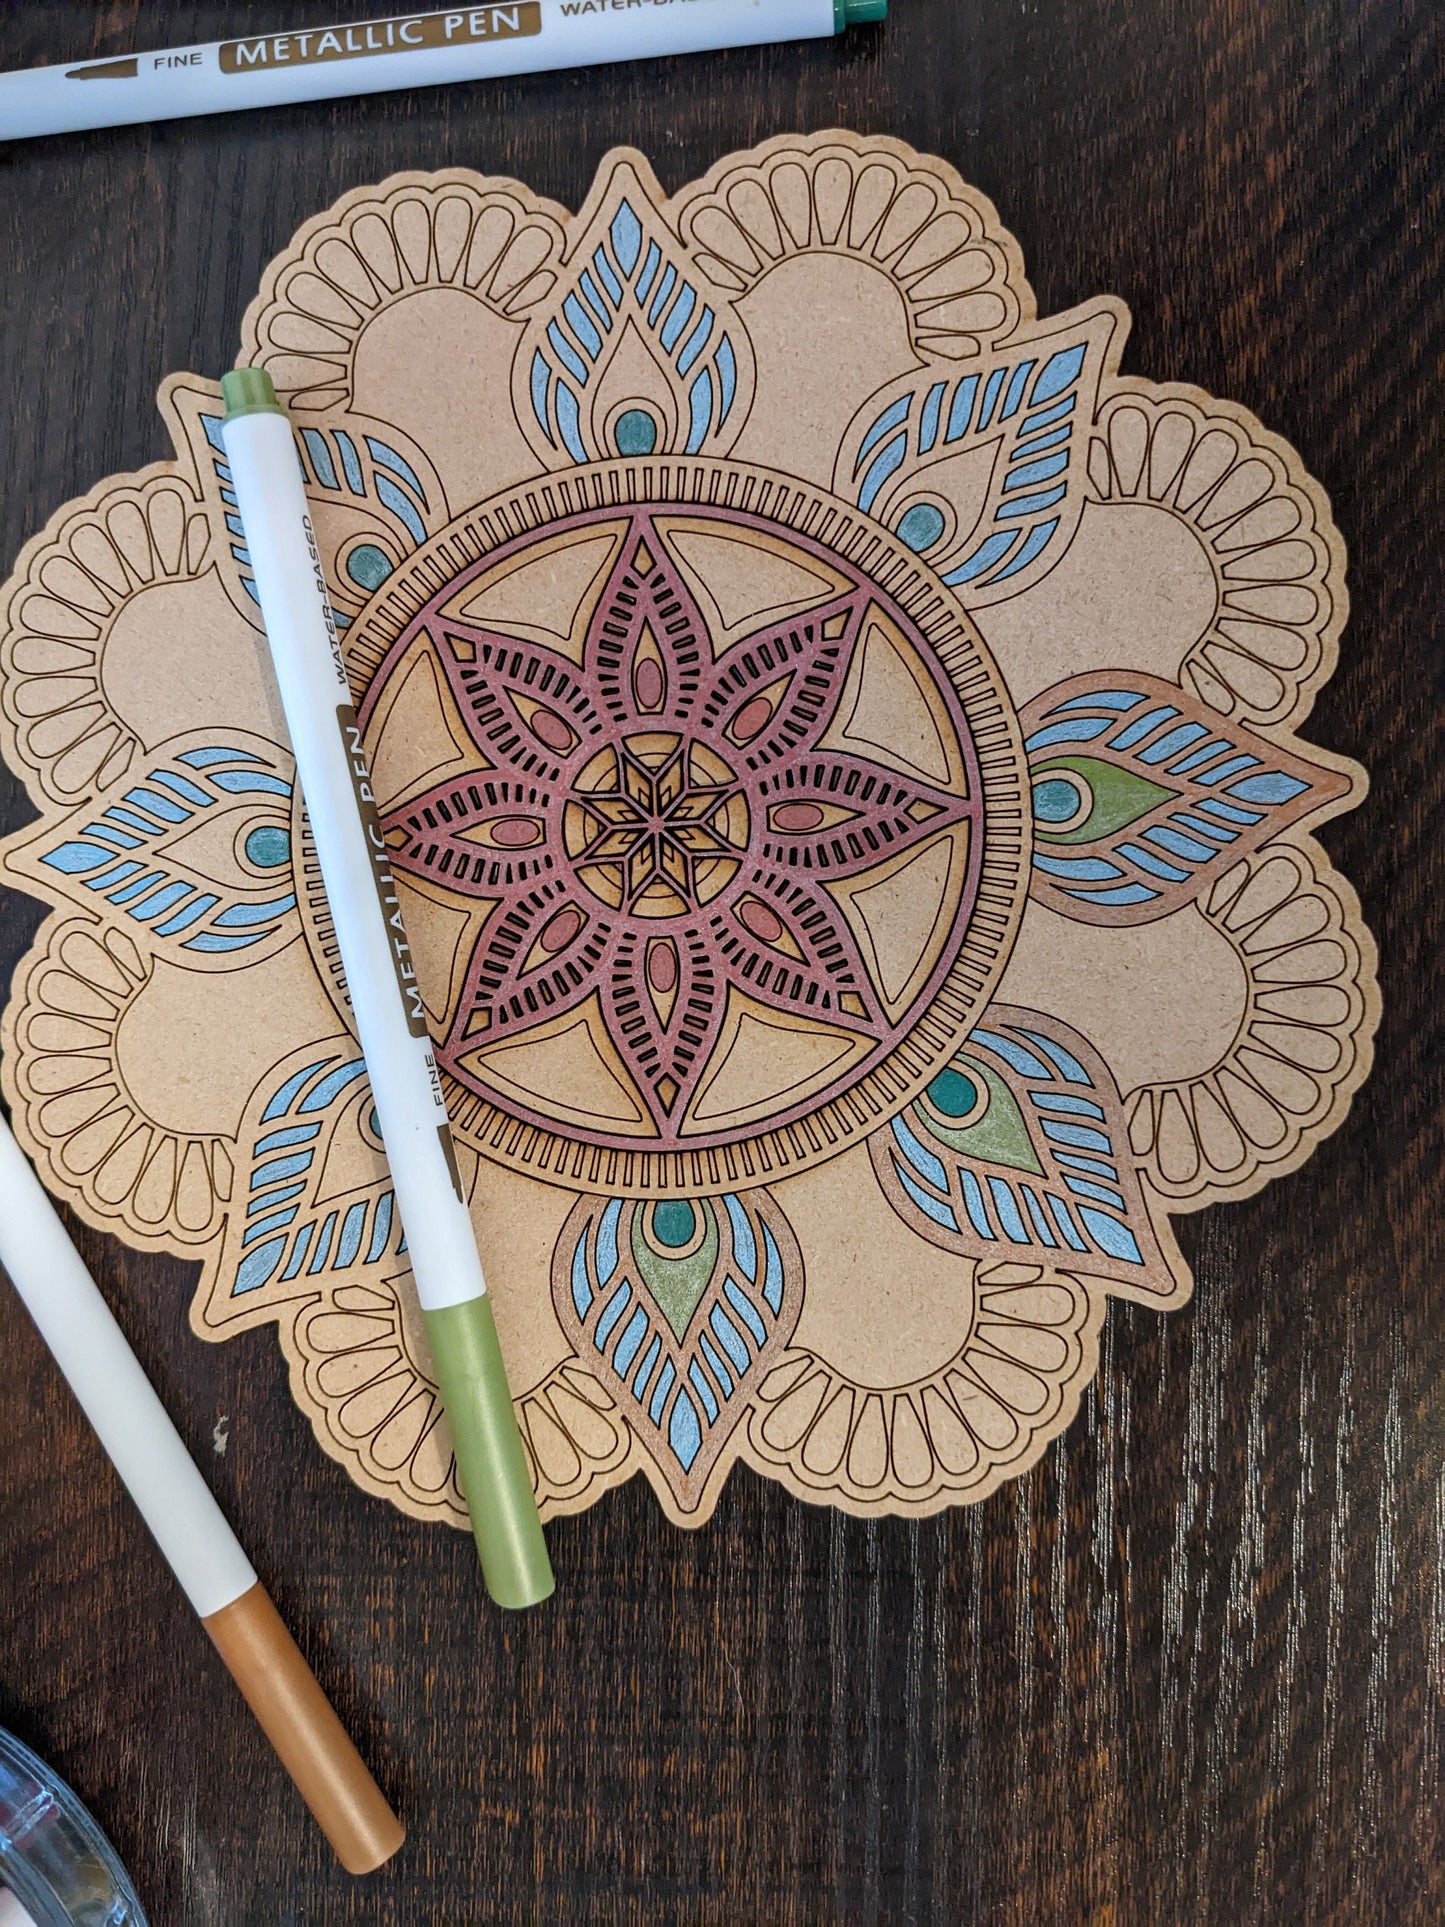 DIY Mandala Painting | Color your own mandala | Gifts | Craft Kit | Mosaic Kit | Coloring Project | Craft Project | Relaxation